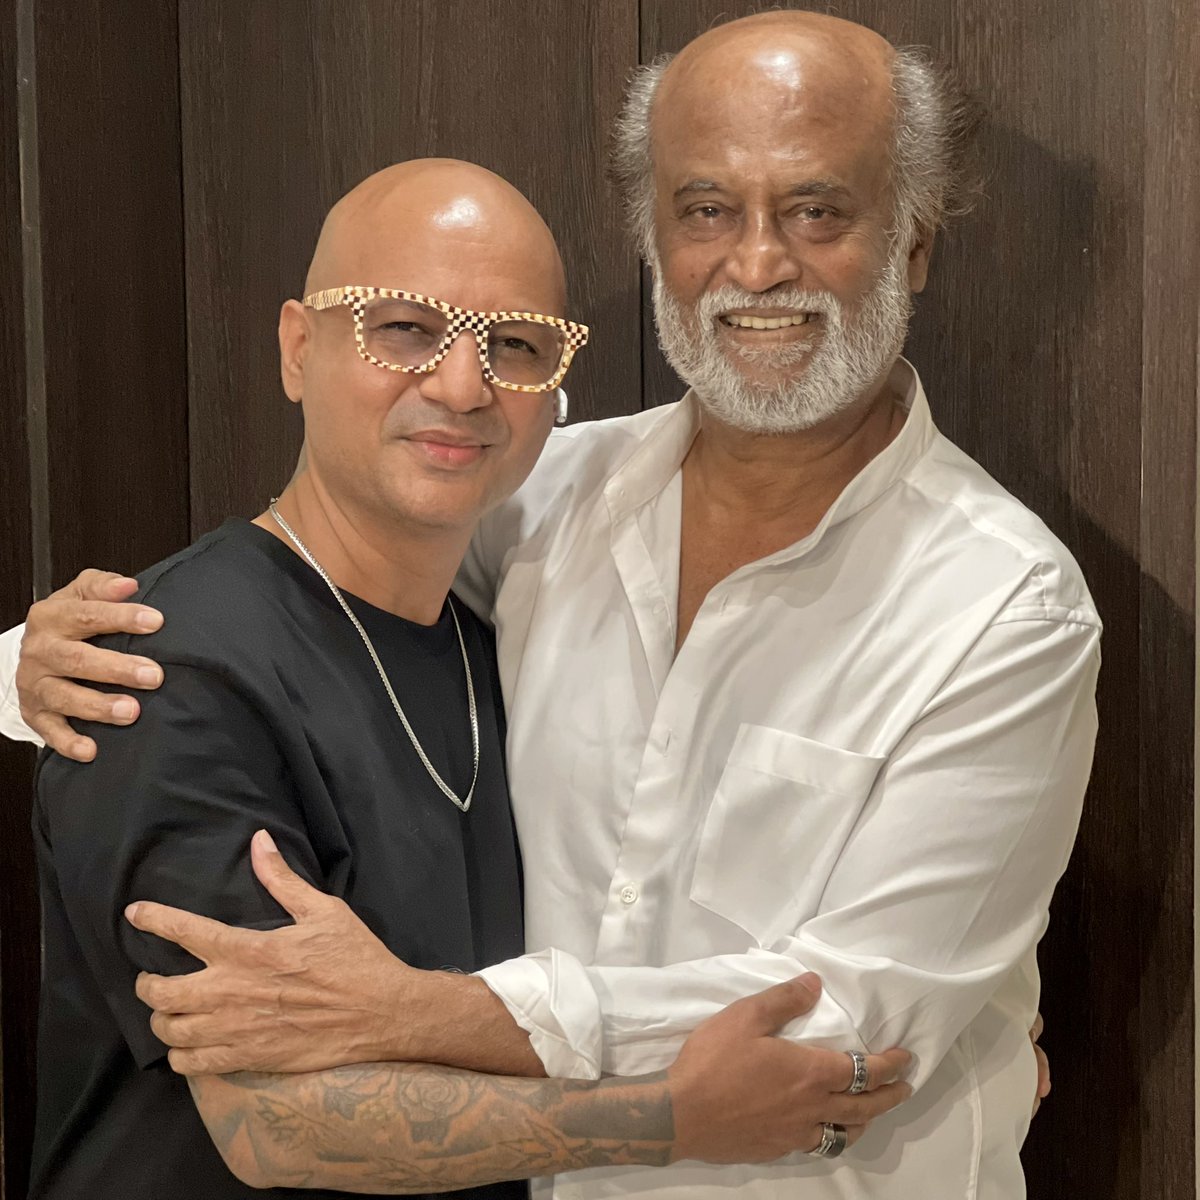 An innovative day at work with our one & only King 👑 Sir RAJNIKANTH 👑❤️

#rajnikanth #king #superstar #indianfilmindustry #chennai #aalimhakim #hakimsaalim #actorslife #viral #trending #trendingpost #innovativeday #workmode